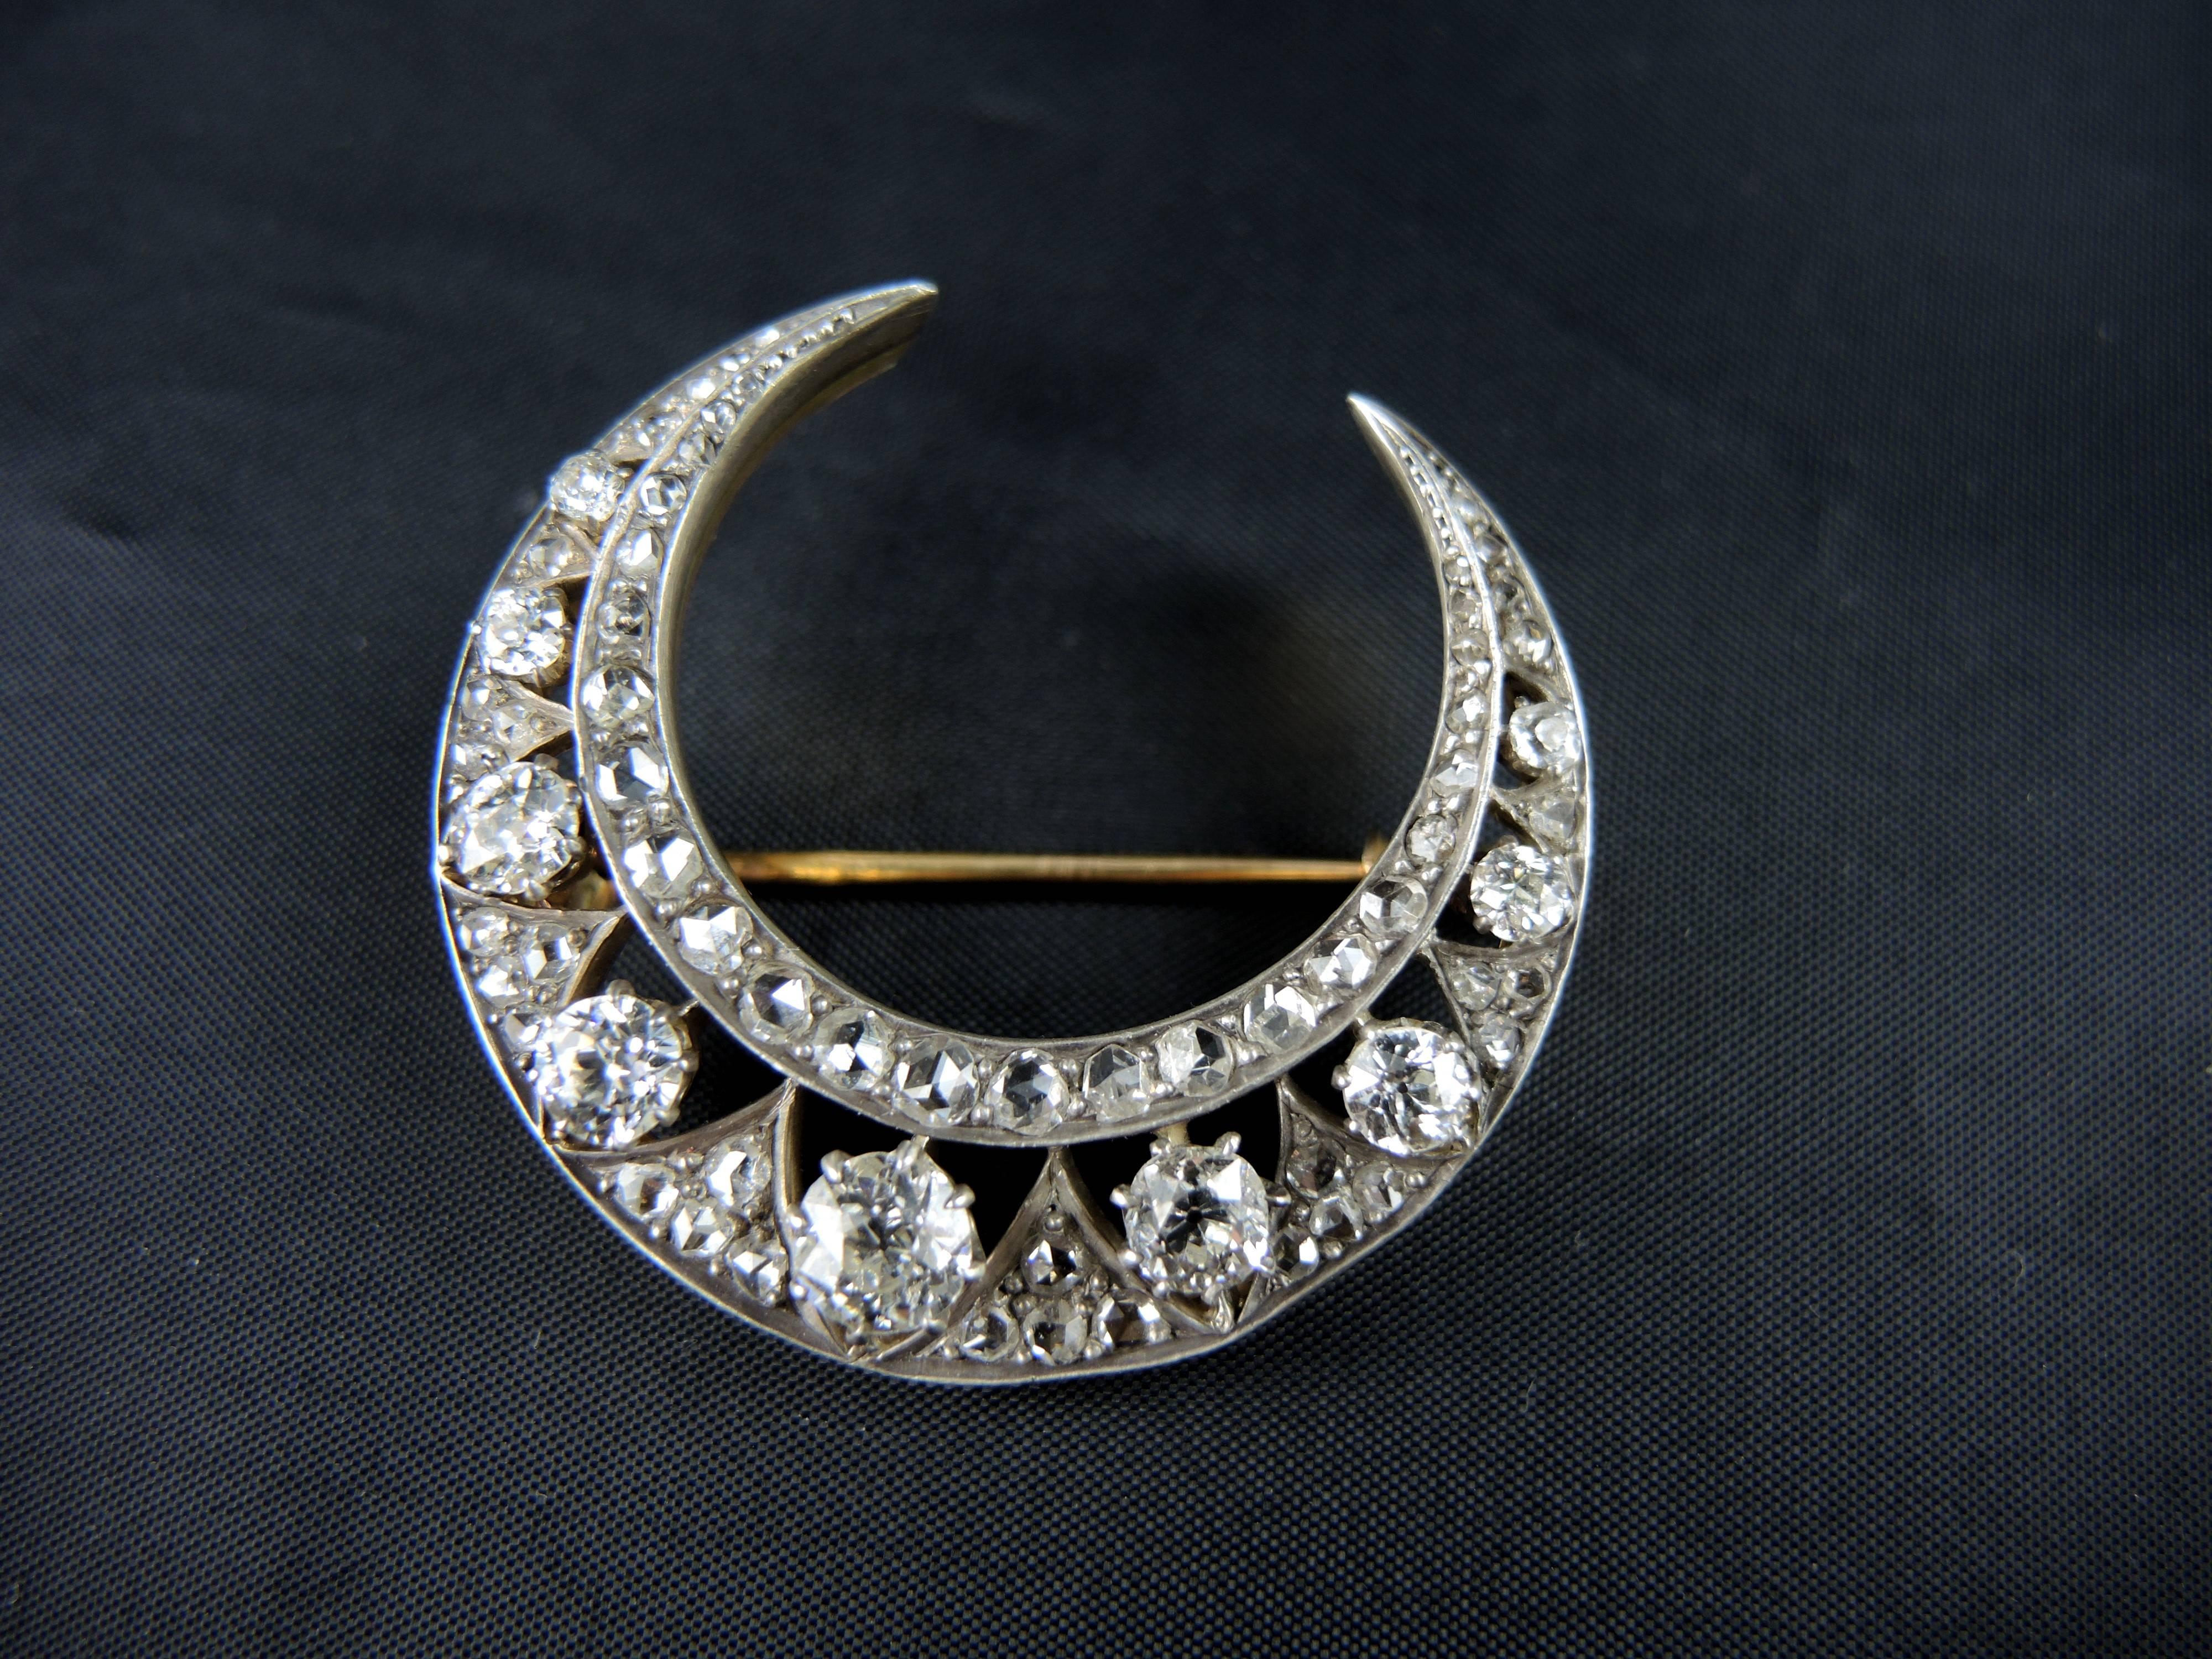 A stunning diamond crescent moon pin from the Napoleon III era (circa 1860) made of 18kt gold and silver (925/000). 
French quality marks: eagle and boar.

The silver is set with 9 sparkling old cut diamonds (apx 2,60 cts in total) and 56 rose